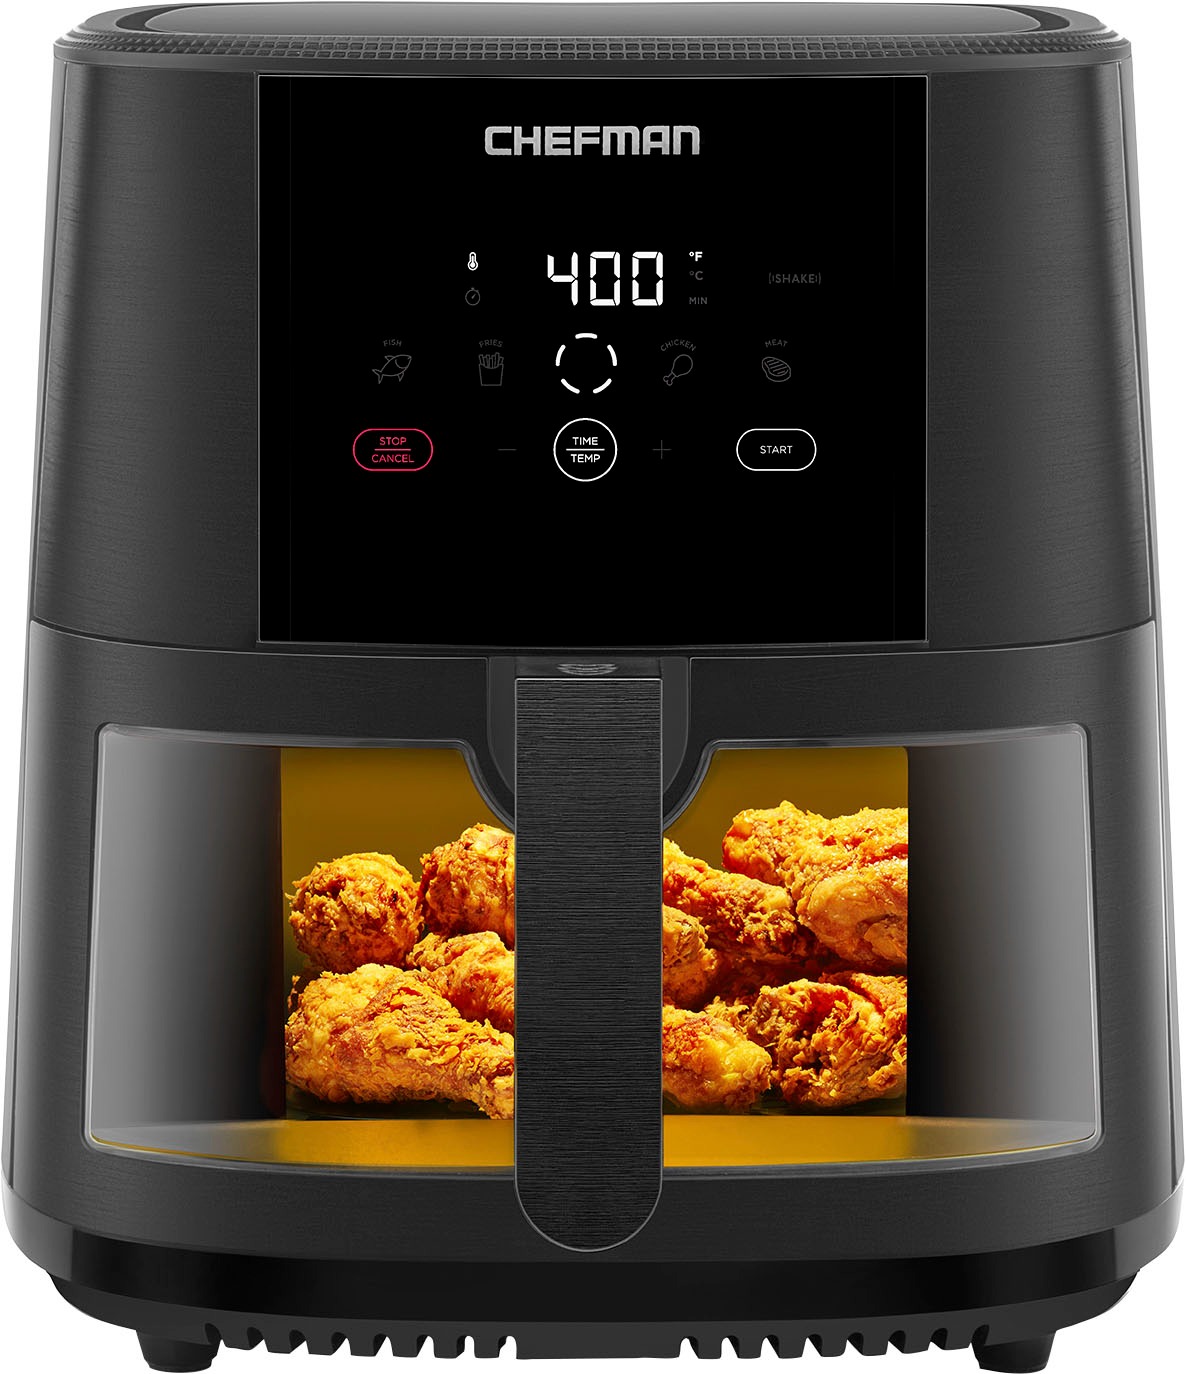 CHEFMAN TurboFry® Touch 8-Qt. Digital Air Fryer with Easy View Window Black RJ38-SQPF-8TW - Best Buy $59.99